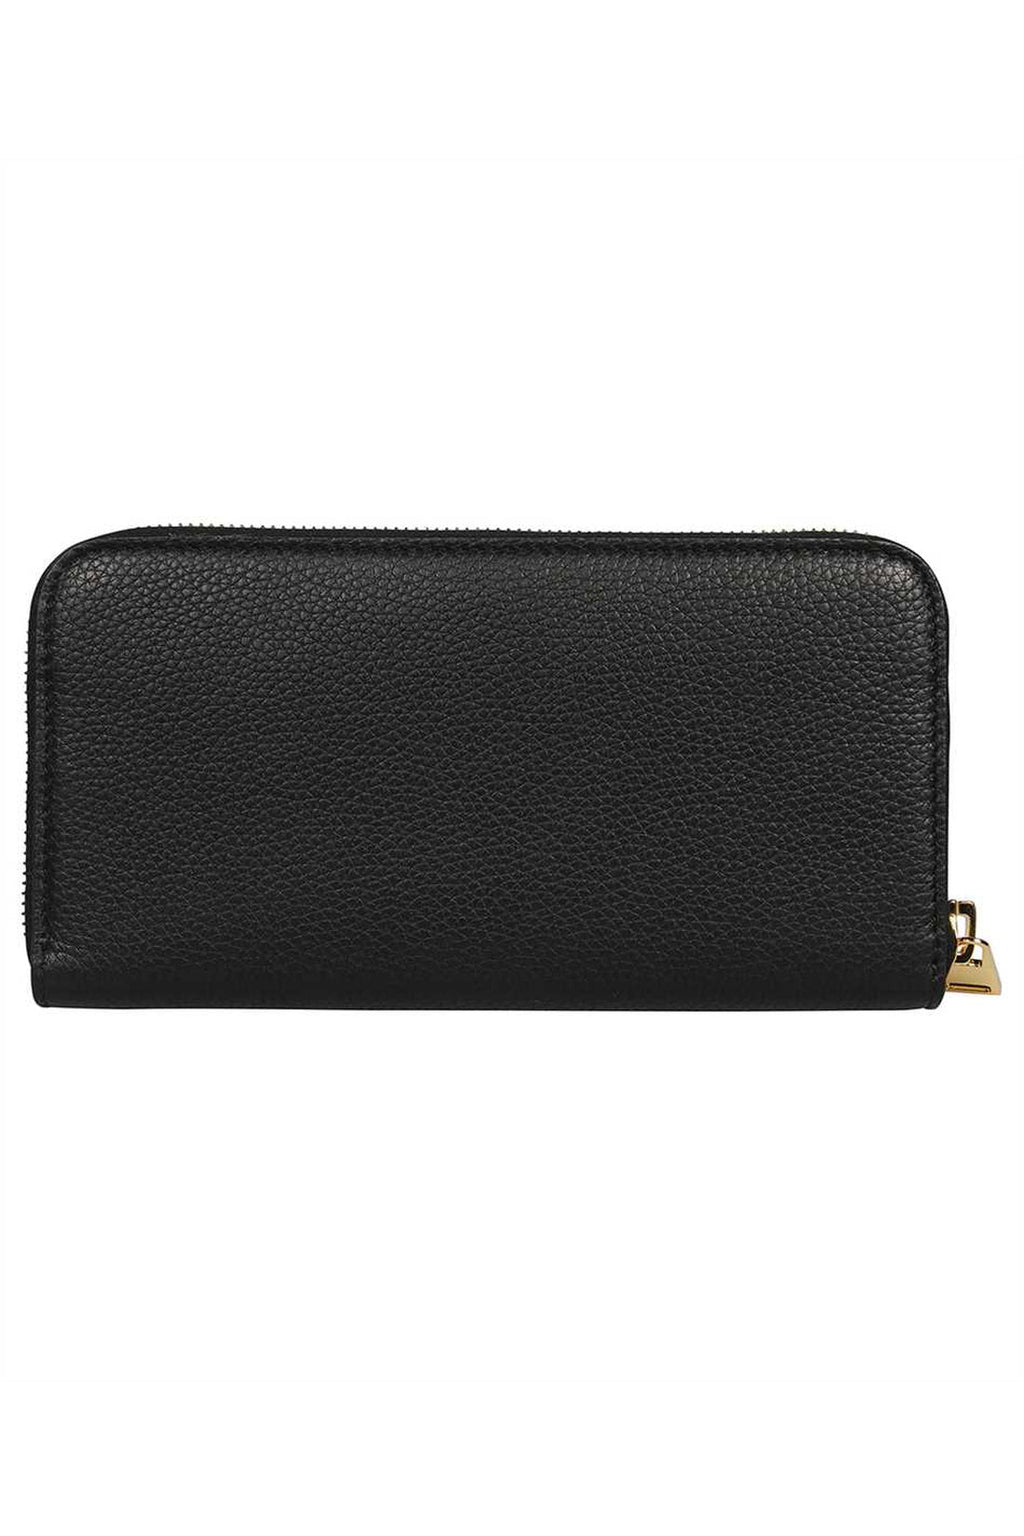 Tom Ford-OUTLET-SALE-Leather ziparound wallet-ARCHIVIST